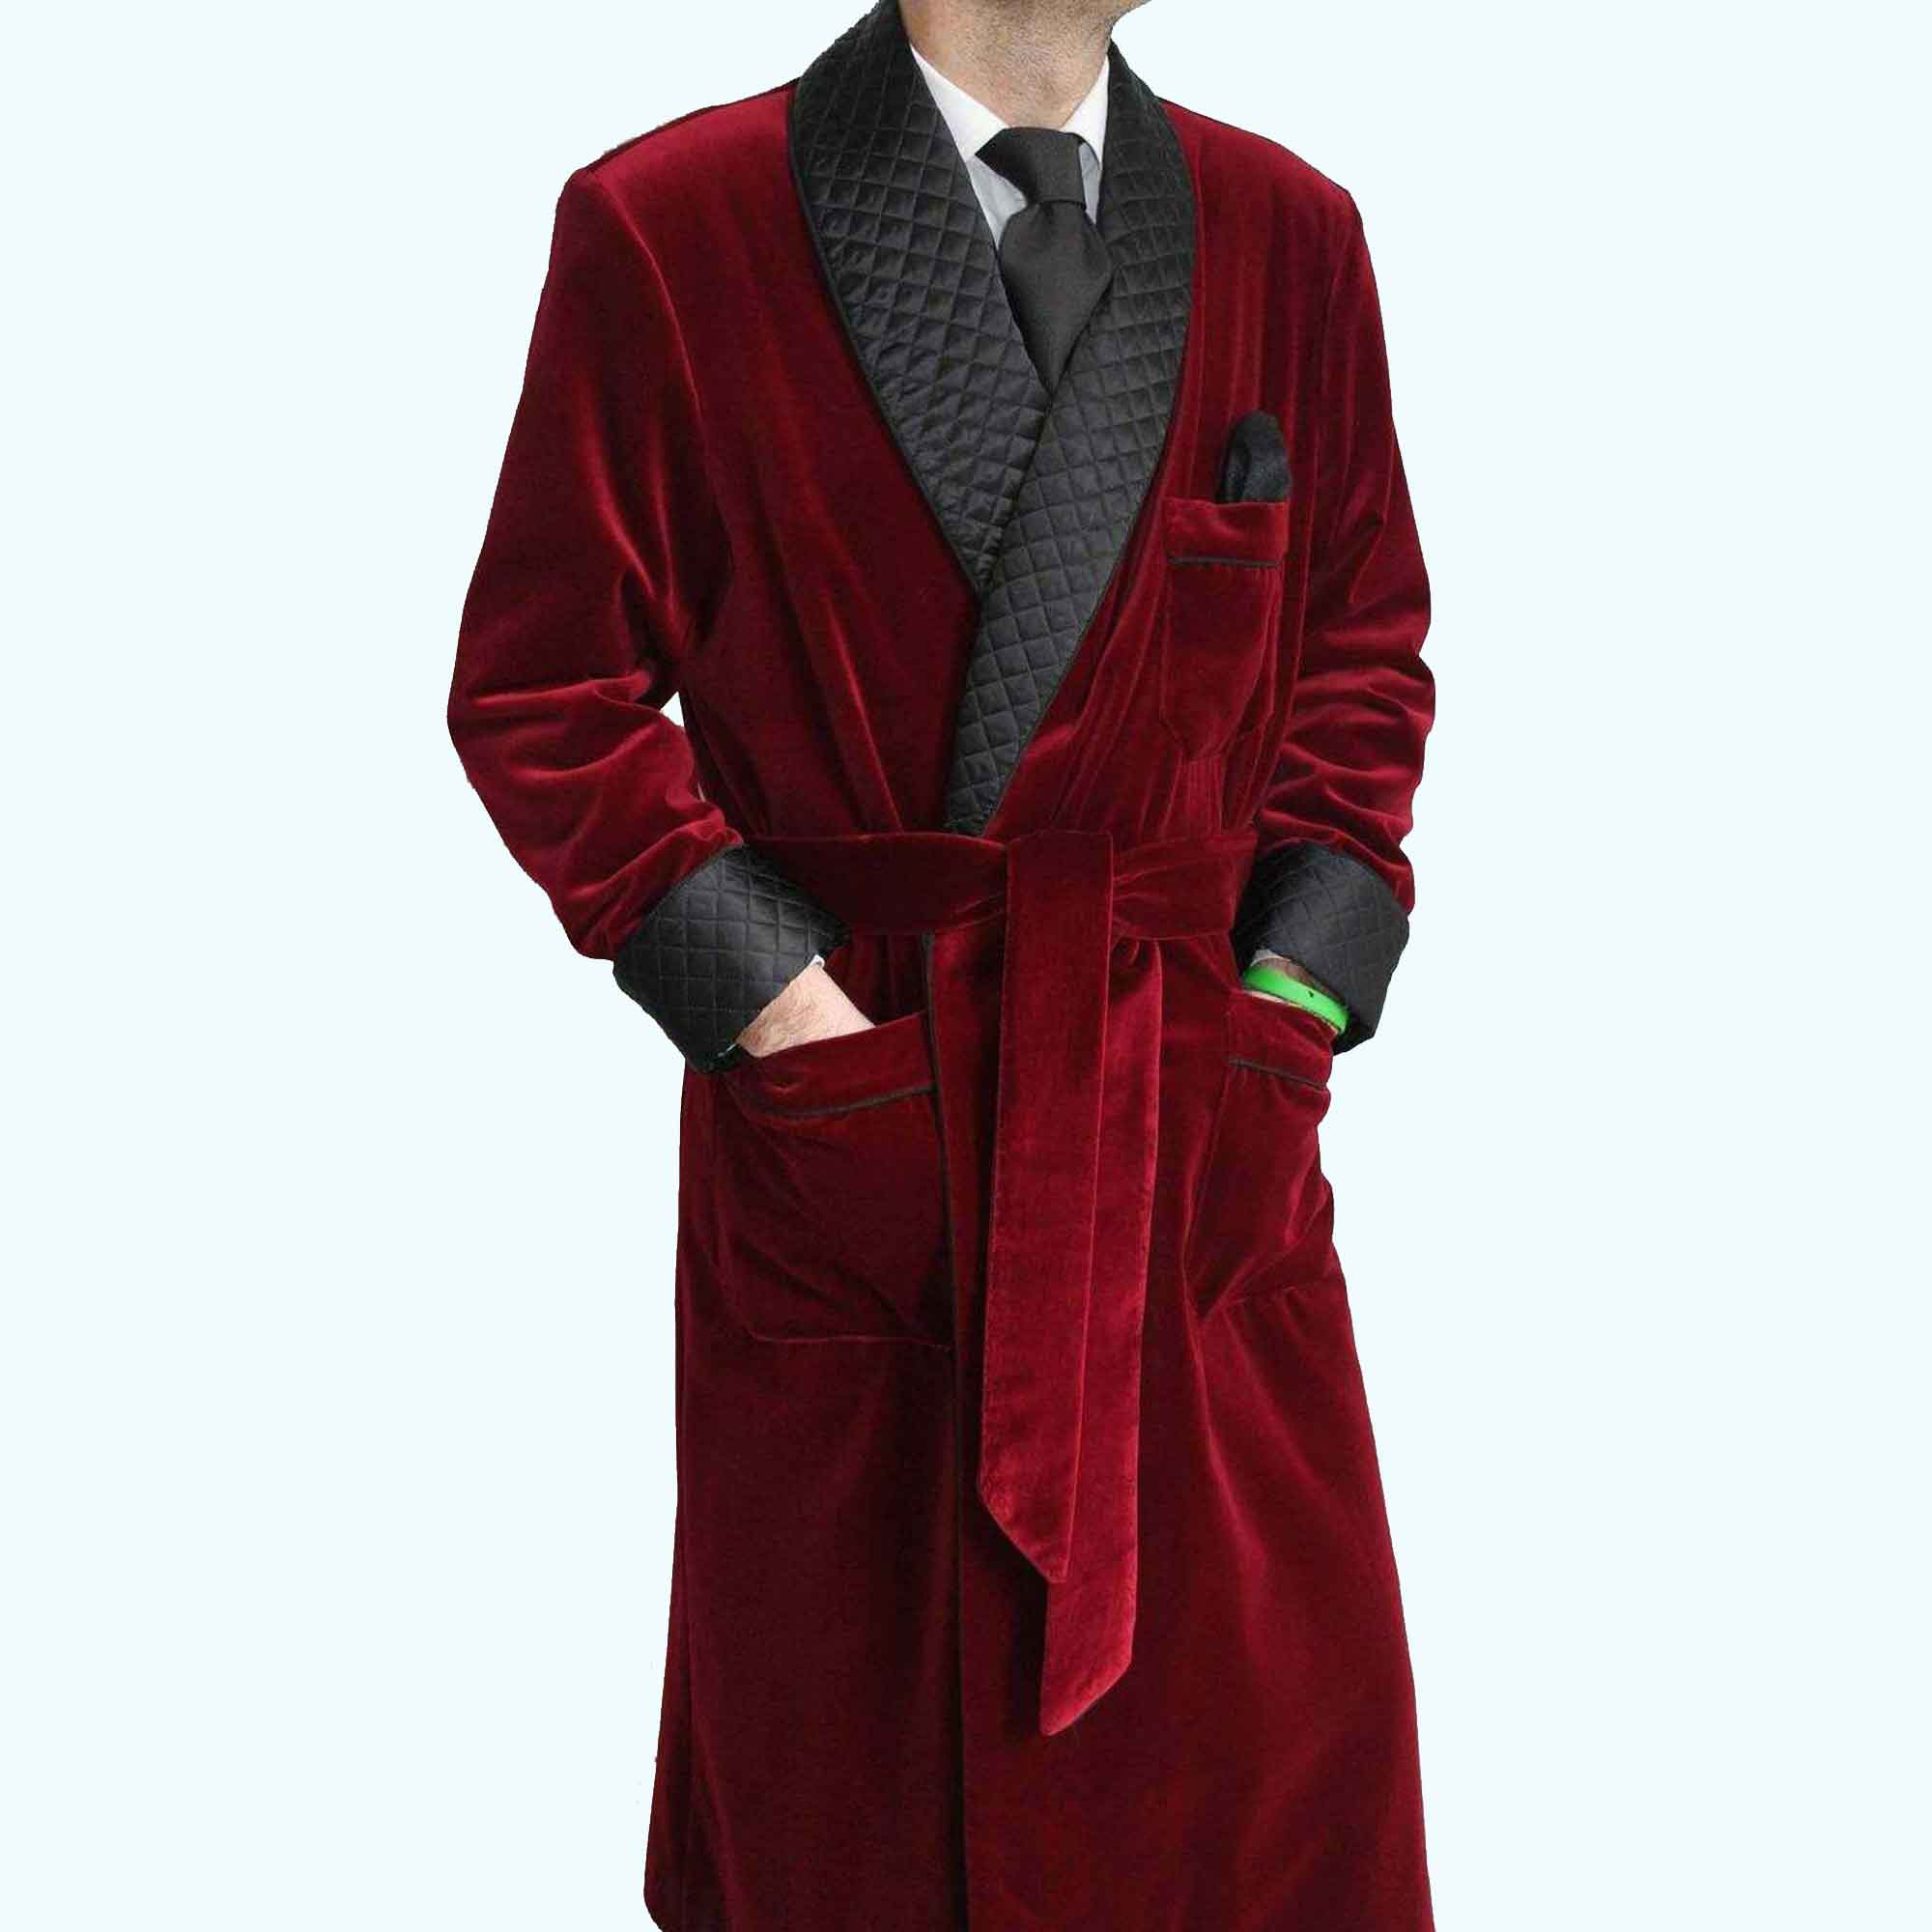 Buy Mens Long Burgundy Smoking Jacket Robe Quilted Velvet Gown Evening ...